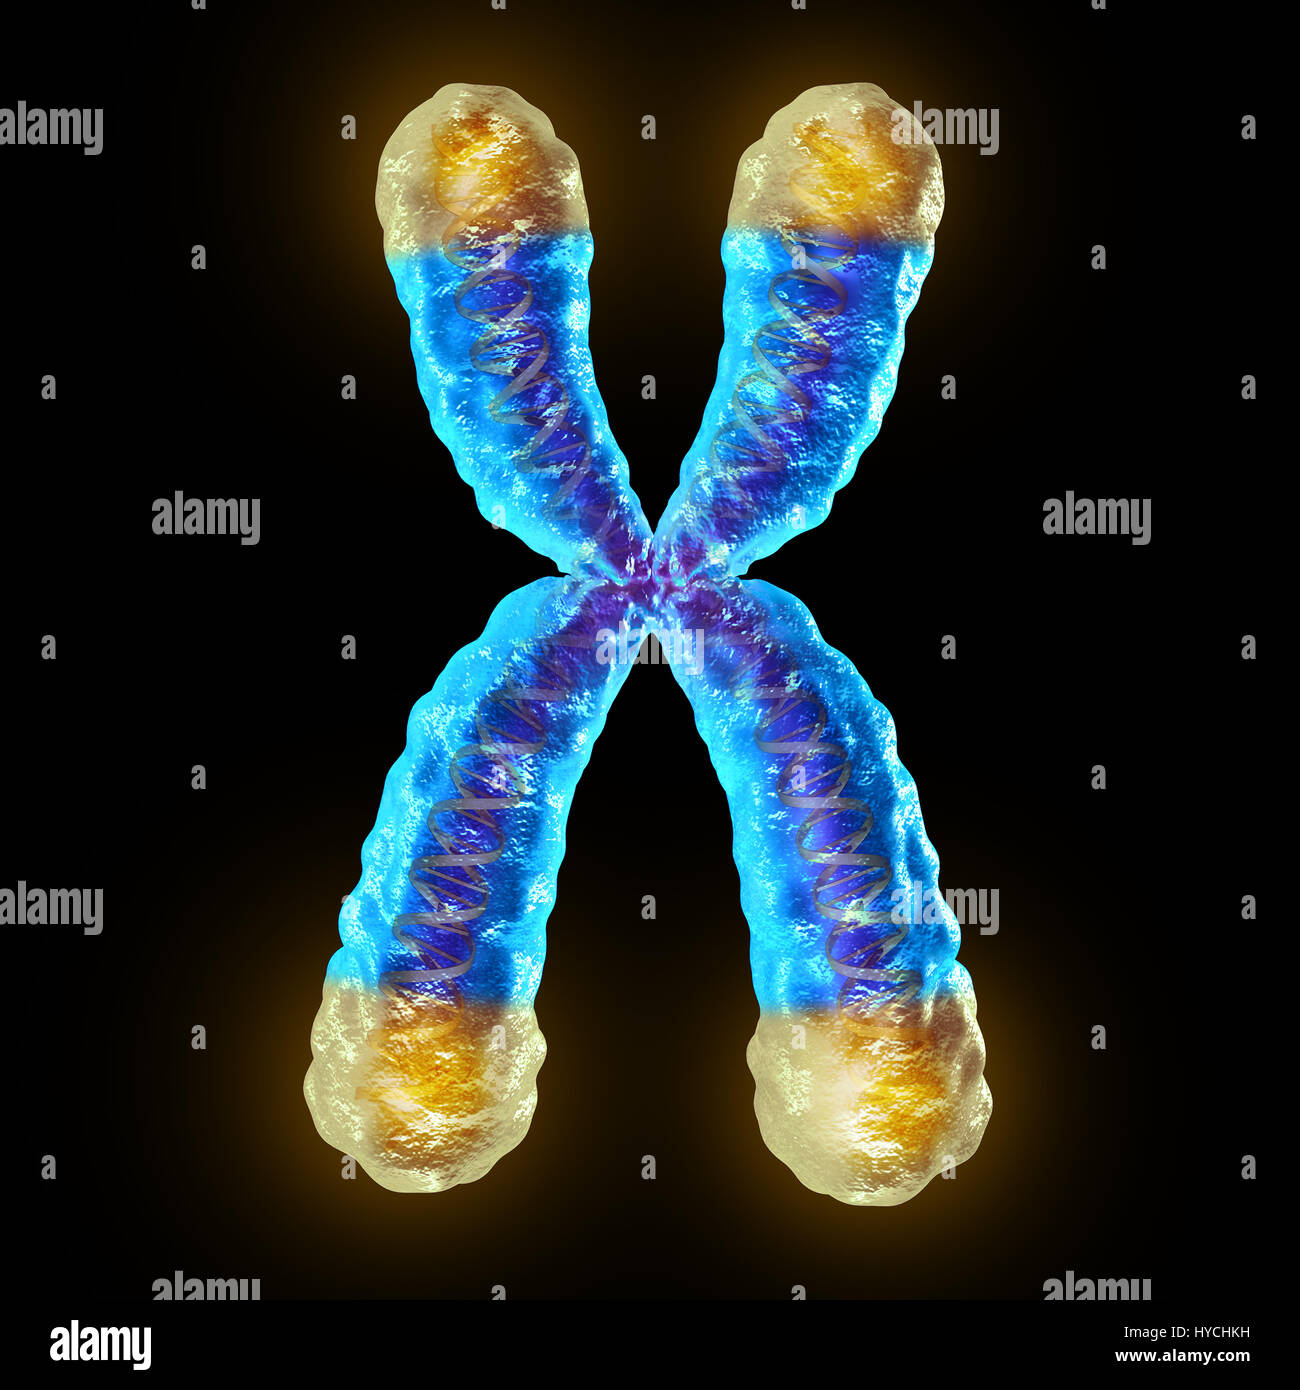 Telomere length medical concept and telomeres located on the end caps of a chromosome resulting in aging by damaging DNA. Stock Photo